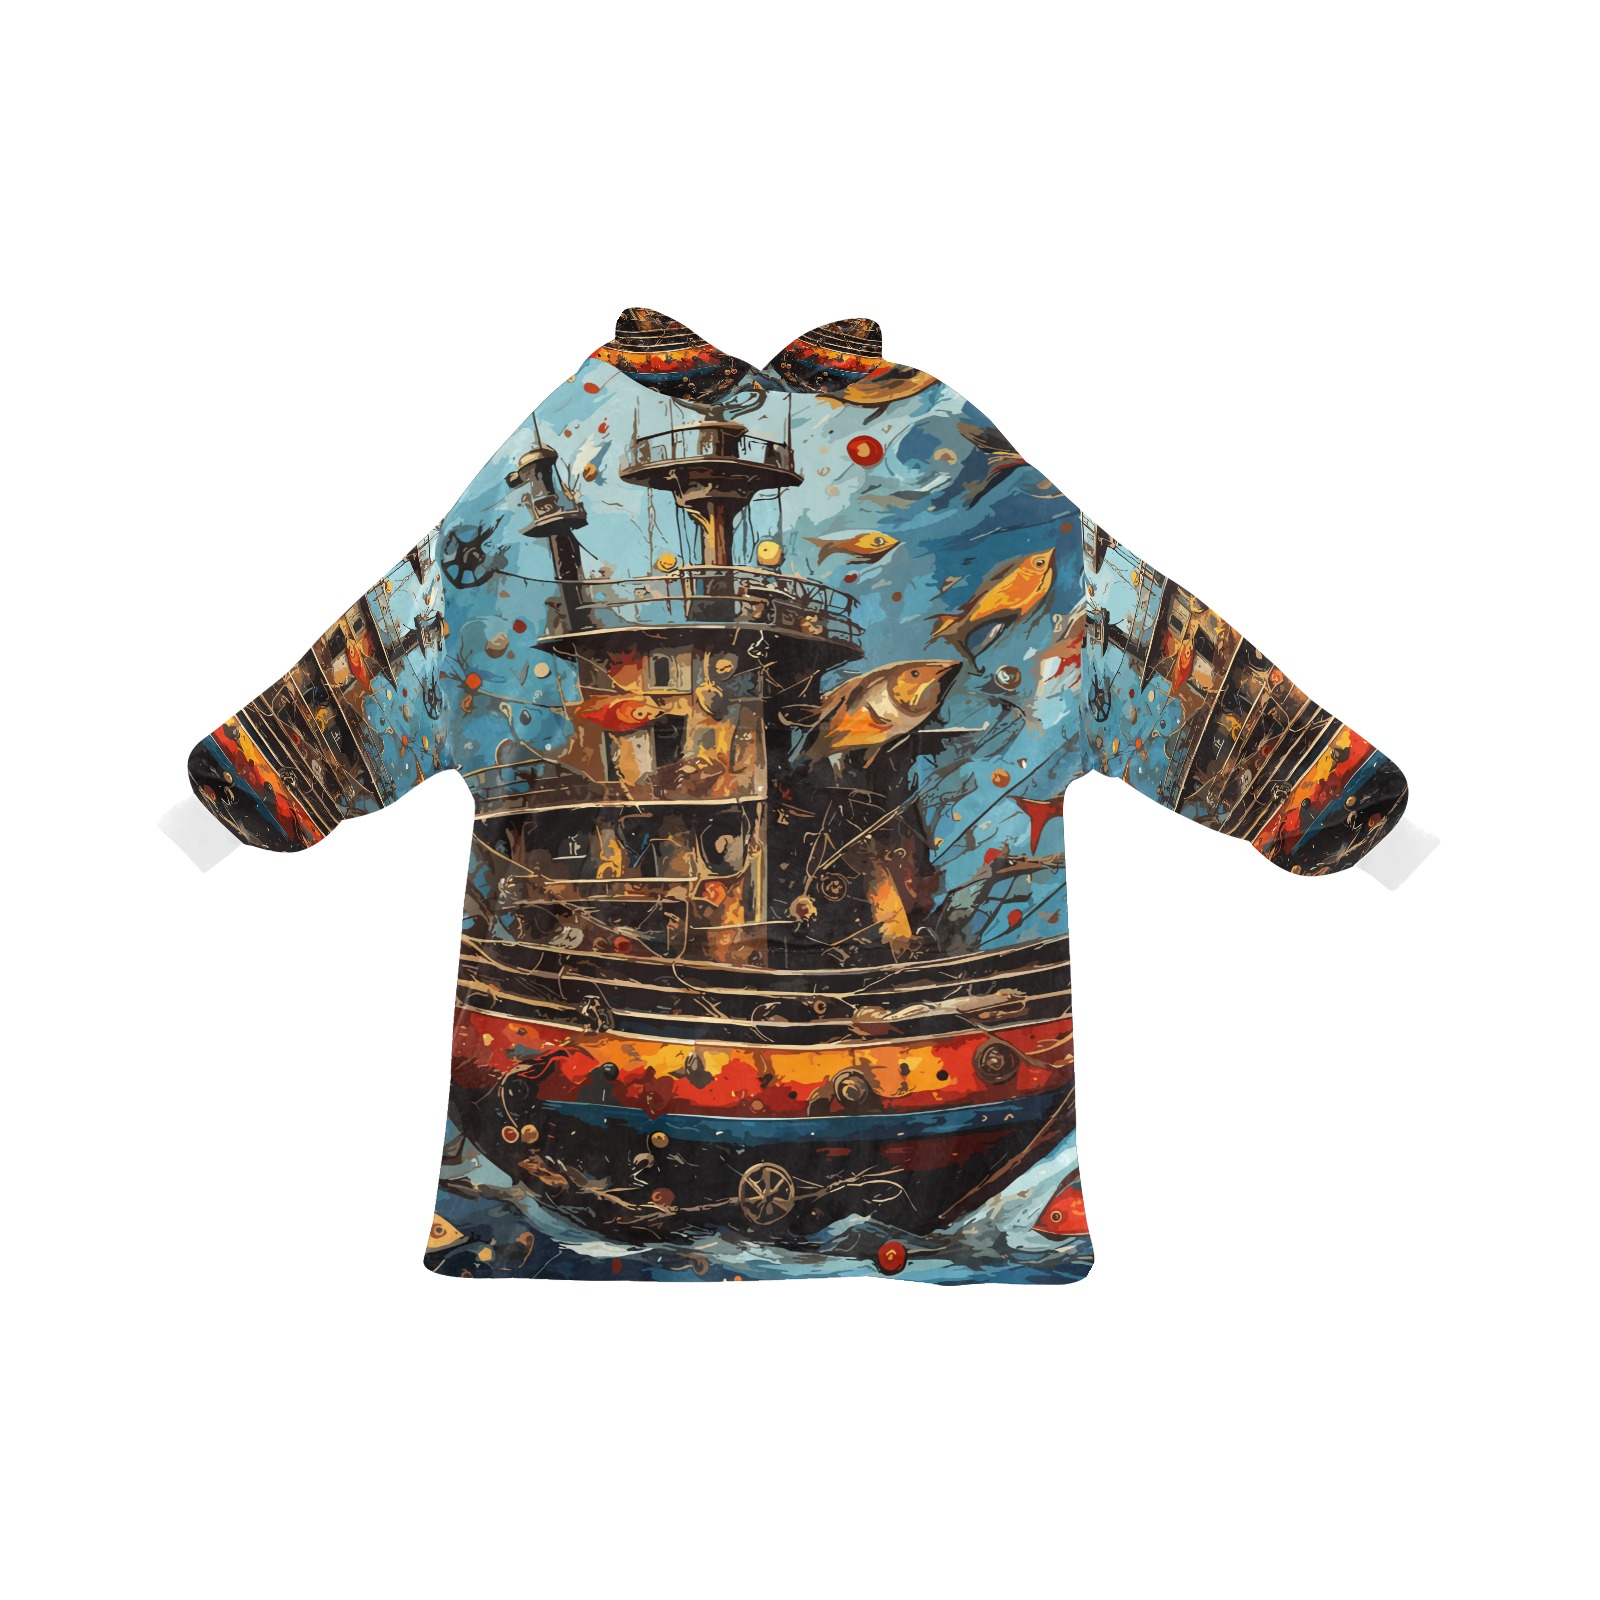 Fairy tale fantasy ship at sea and fishes art. Blanket Hoodie for Men